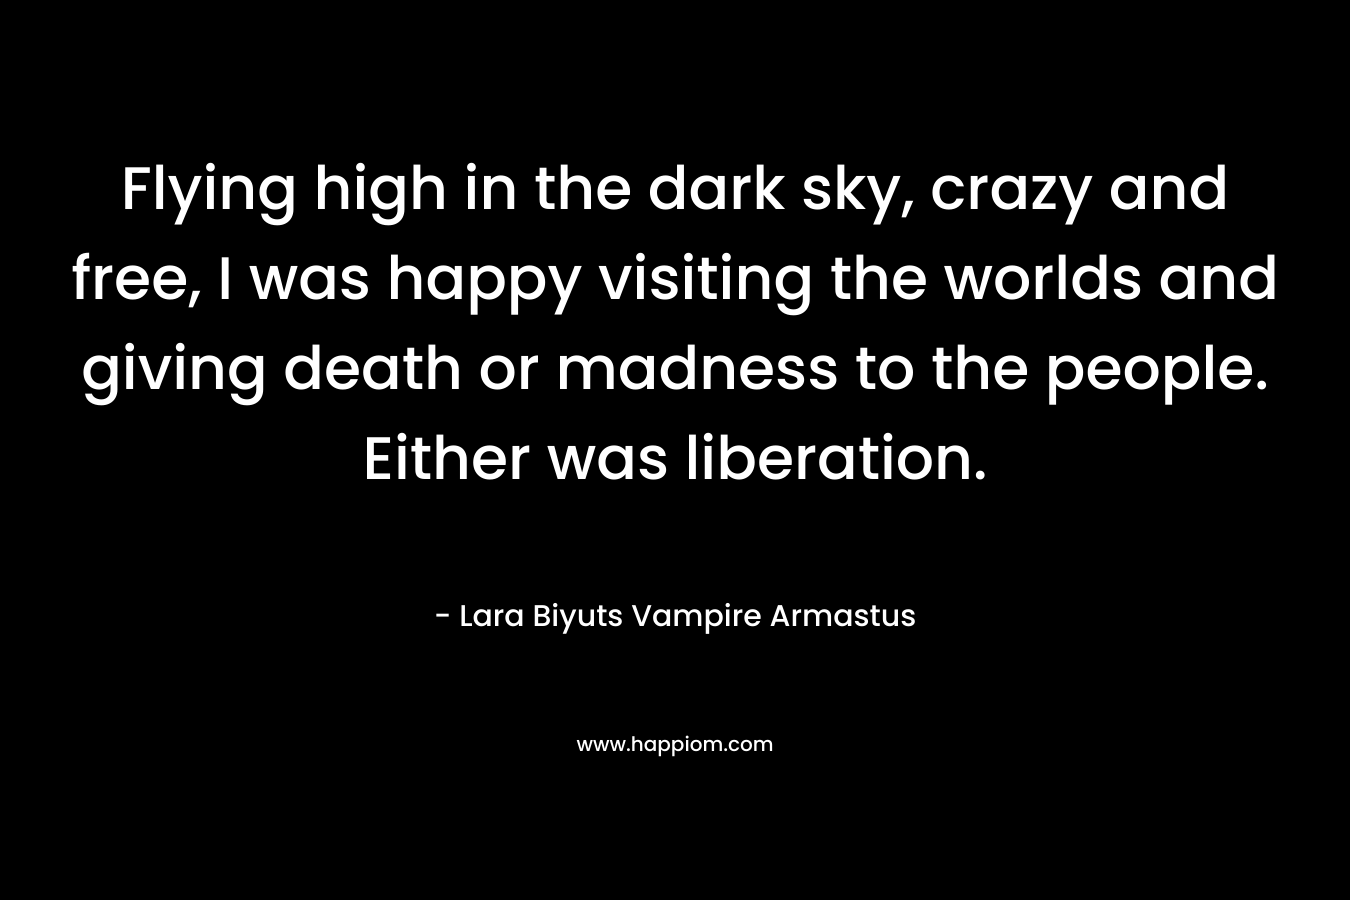 Flying high in the dark sky, crazy and free, I was happy visiting the worlds and giving death or madness to the people. Either was liberation. – Lara Biyuts Vampire Armastus